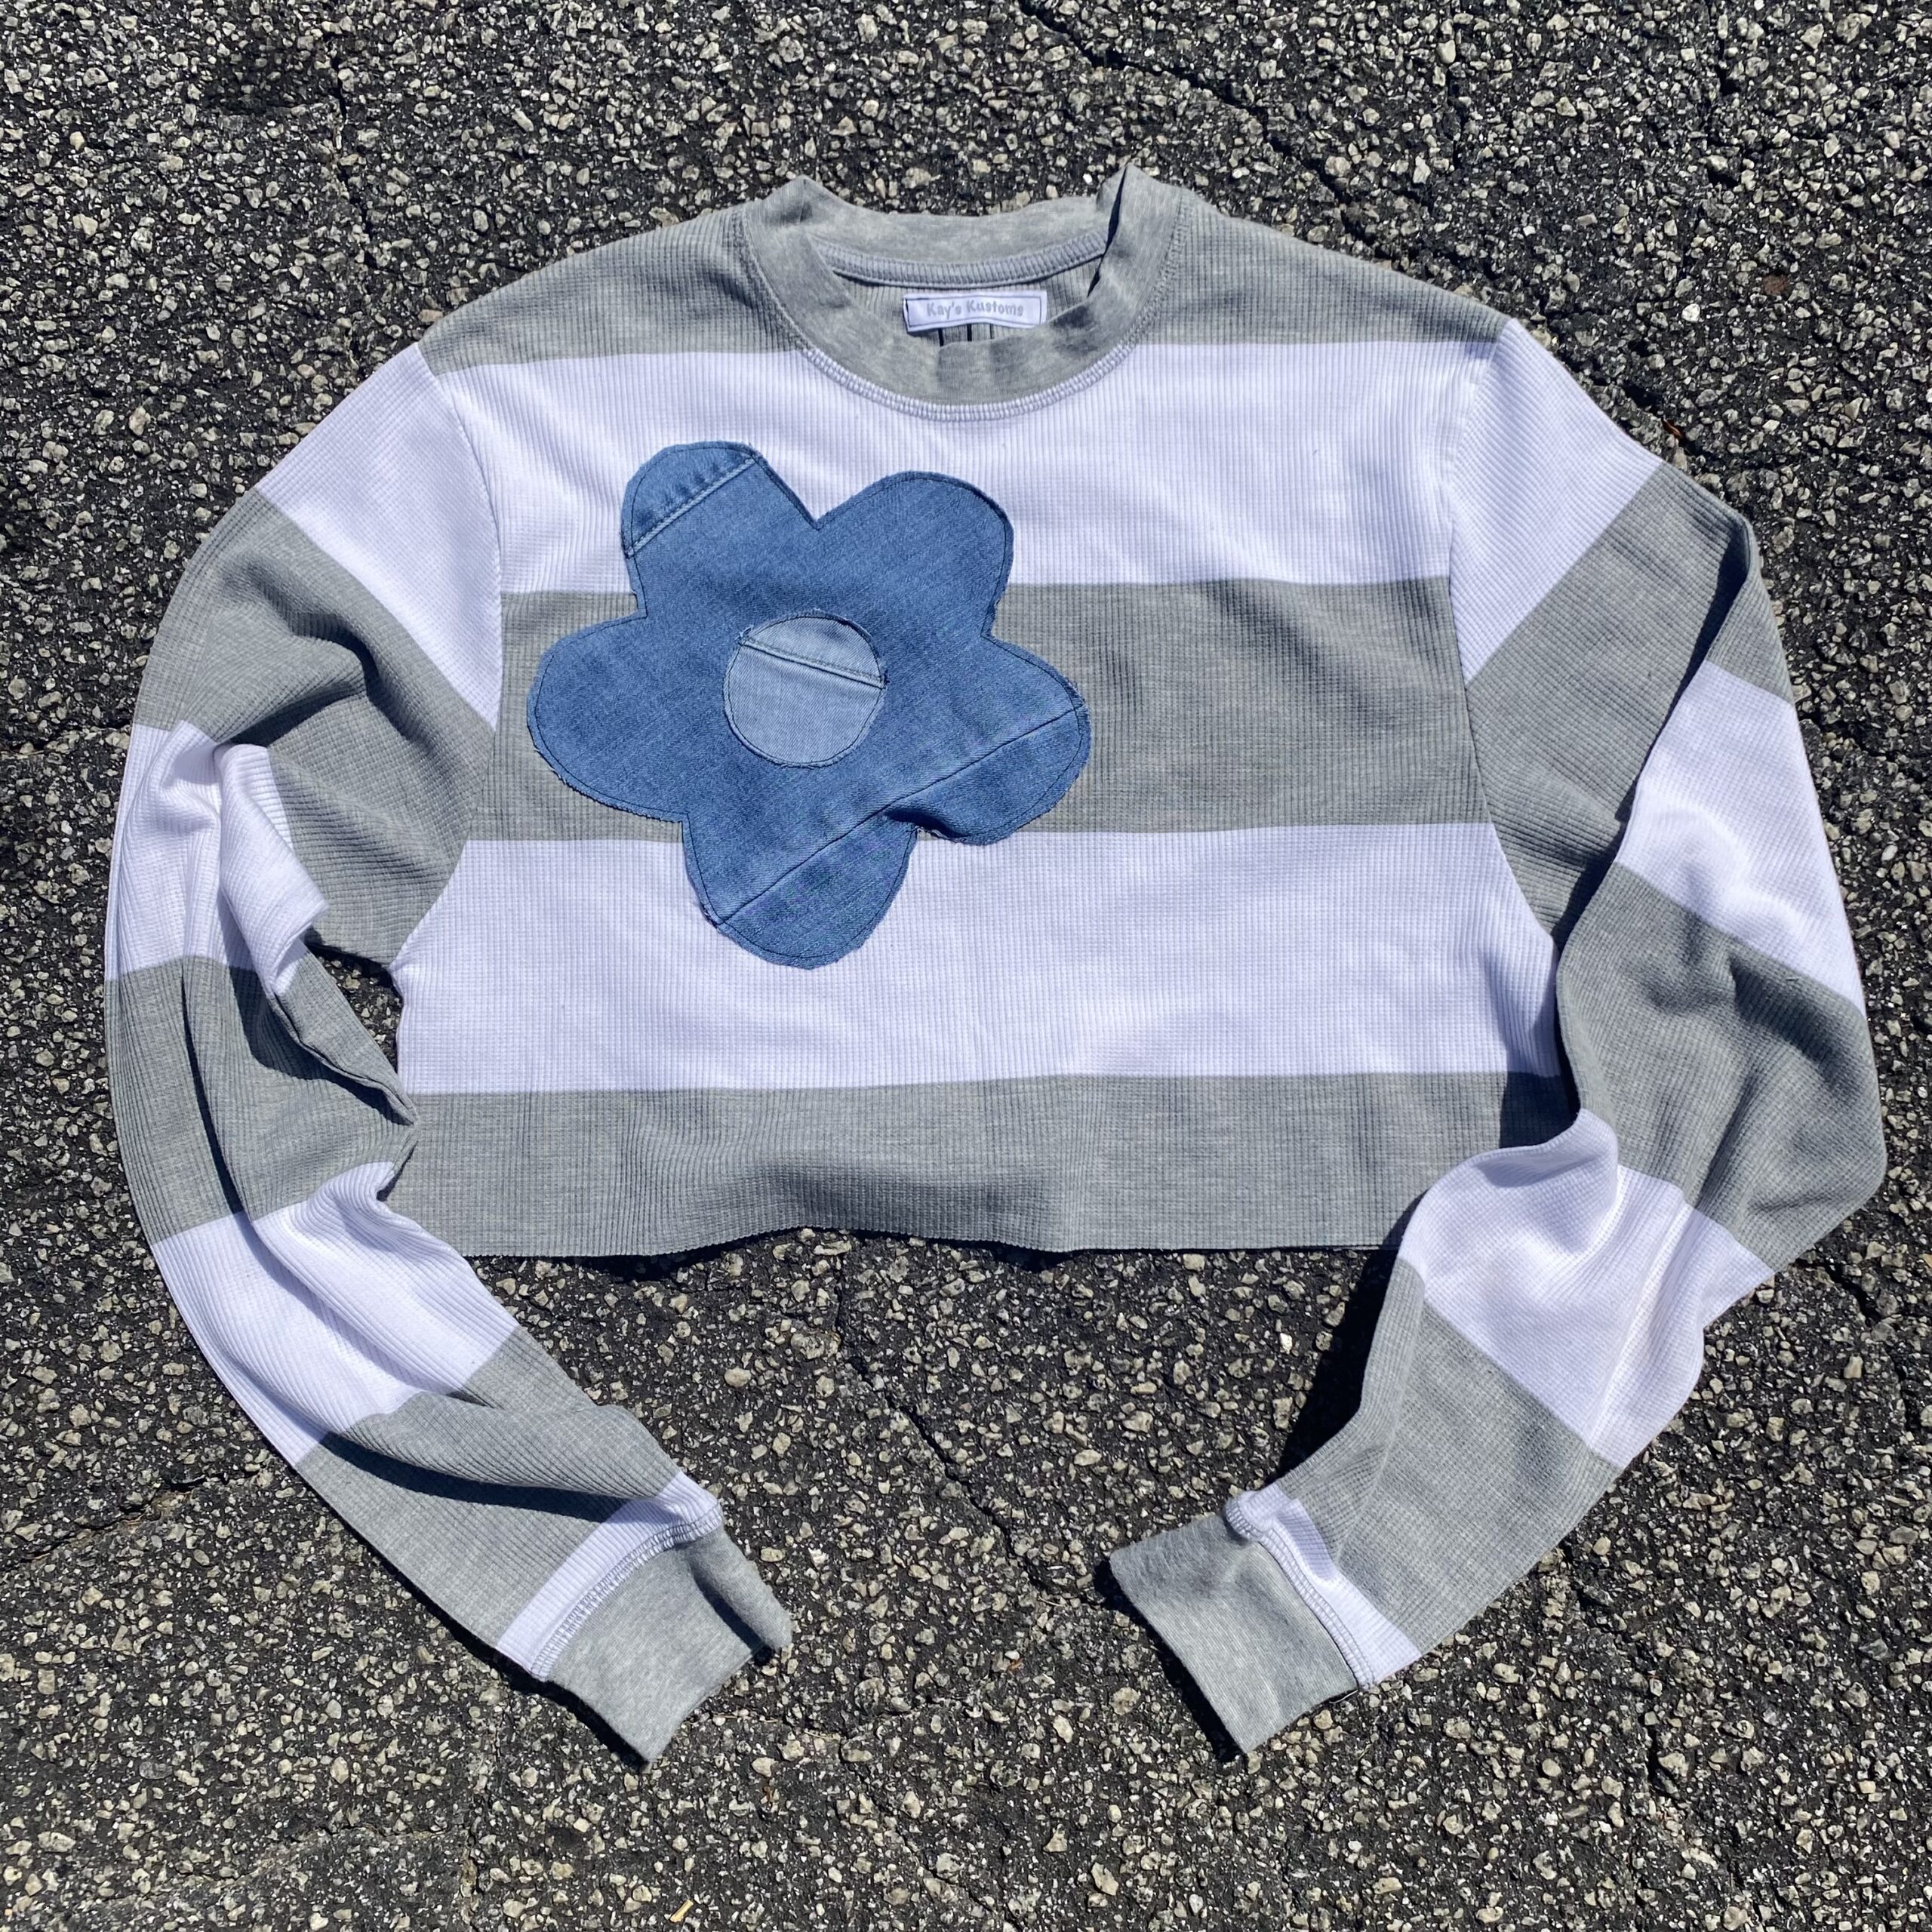 a striped shirt with a blue flower on it.